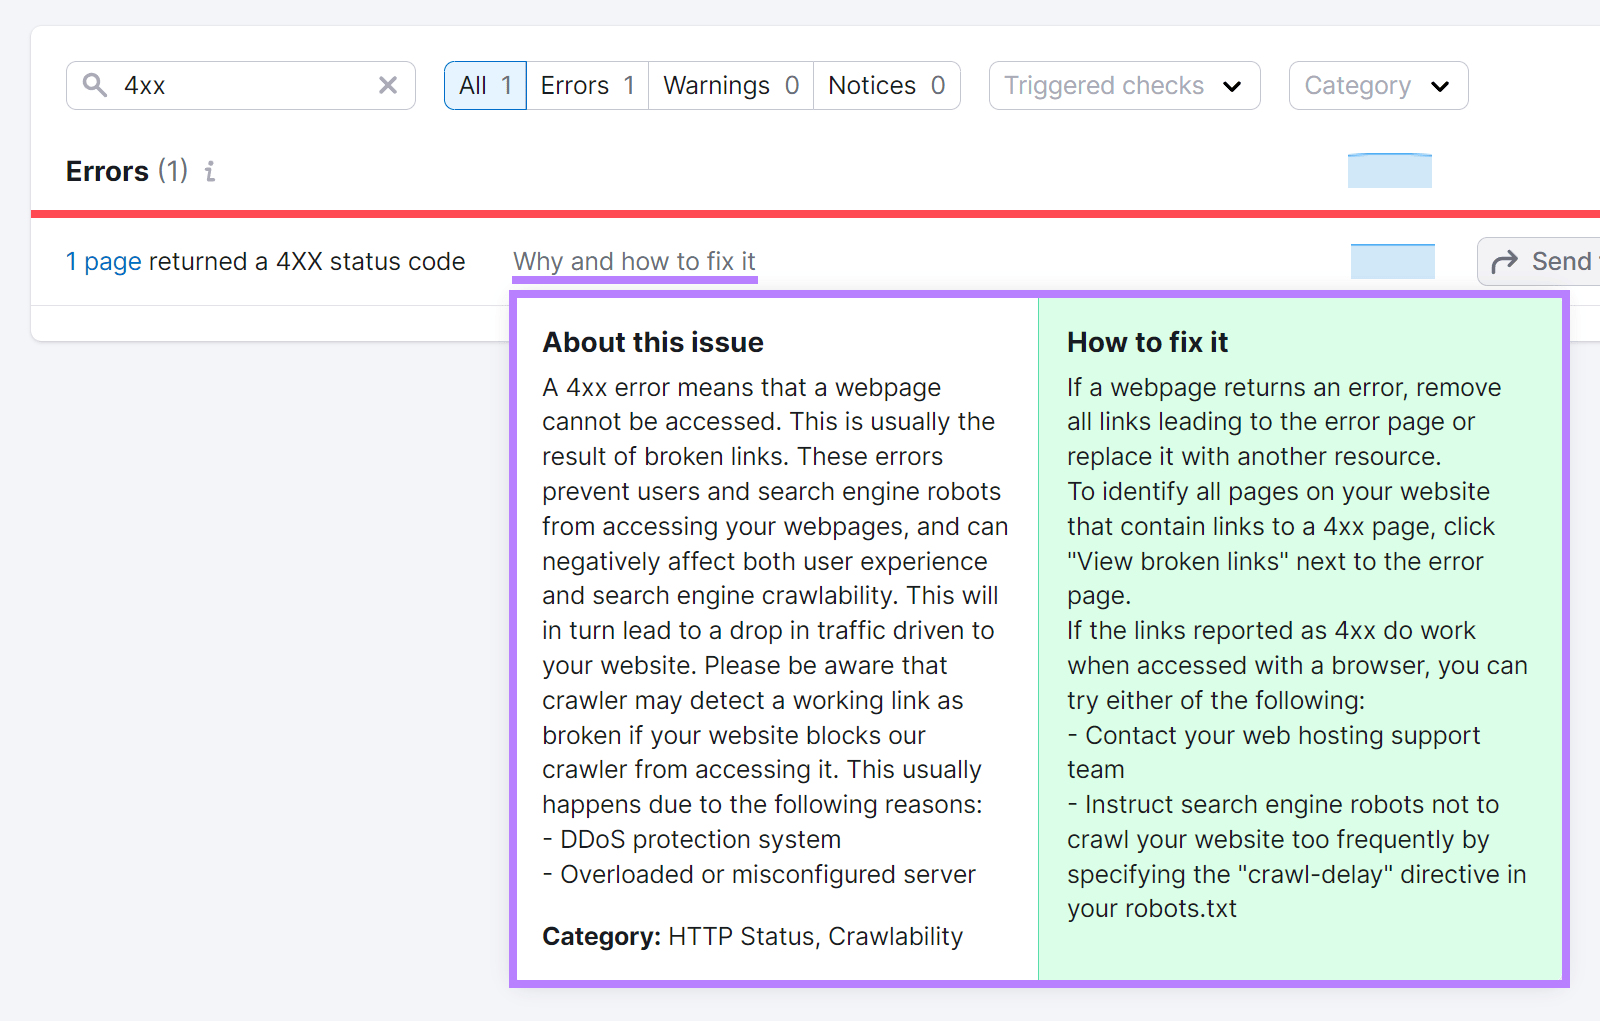 Why and how to fix it text clicked and popup highlighted.